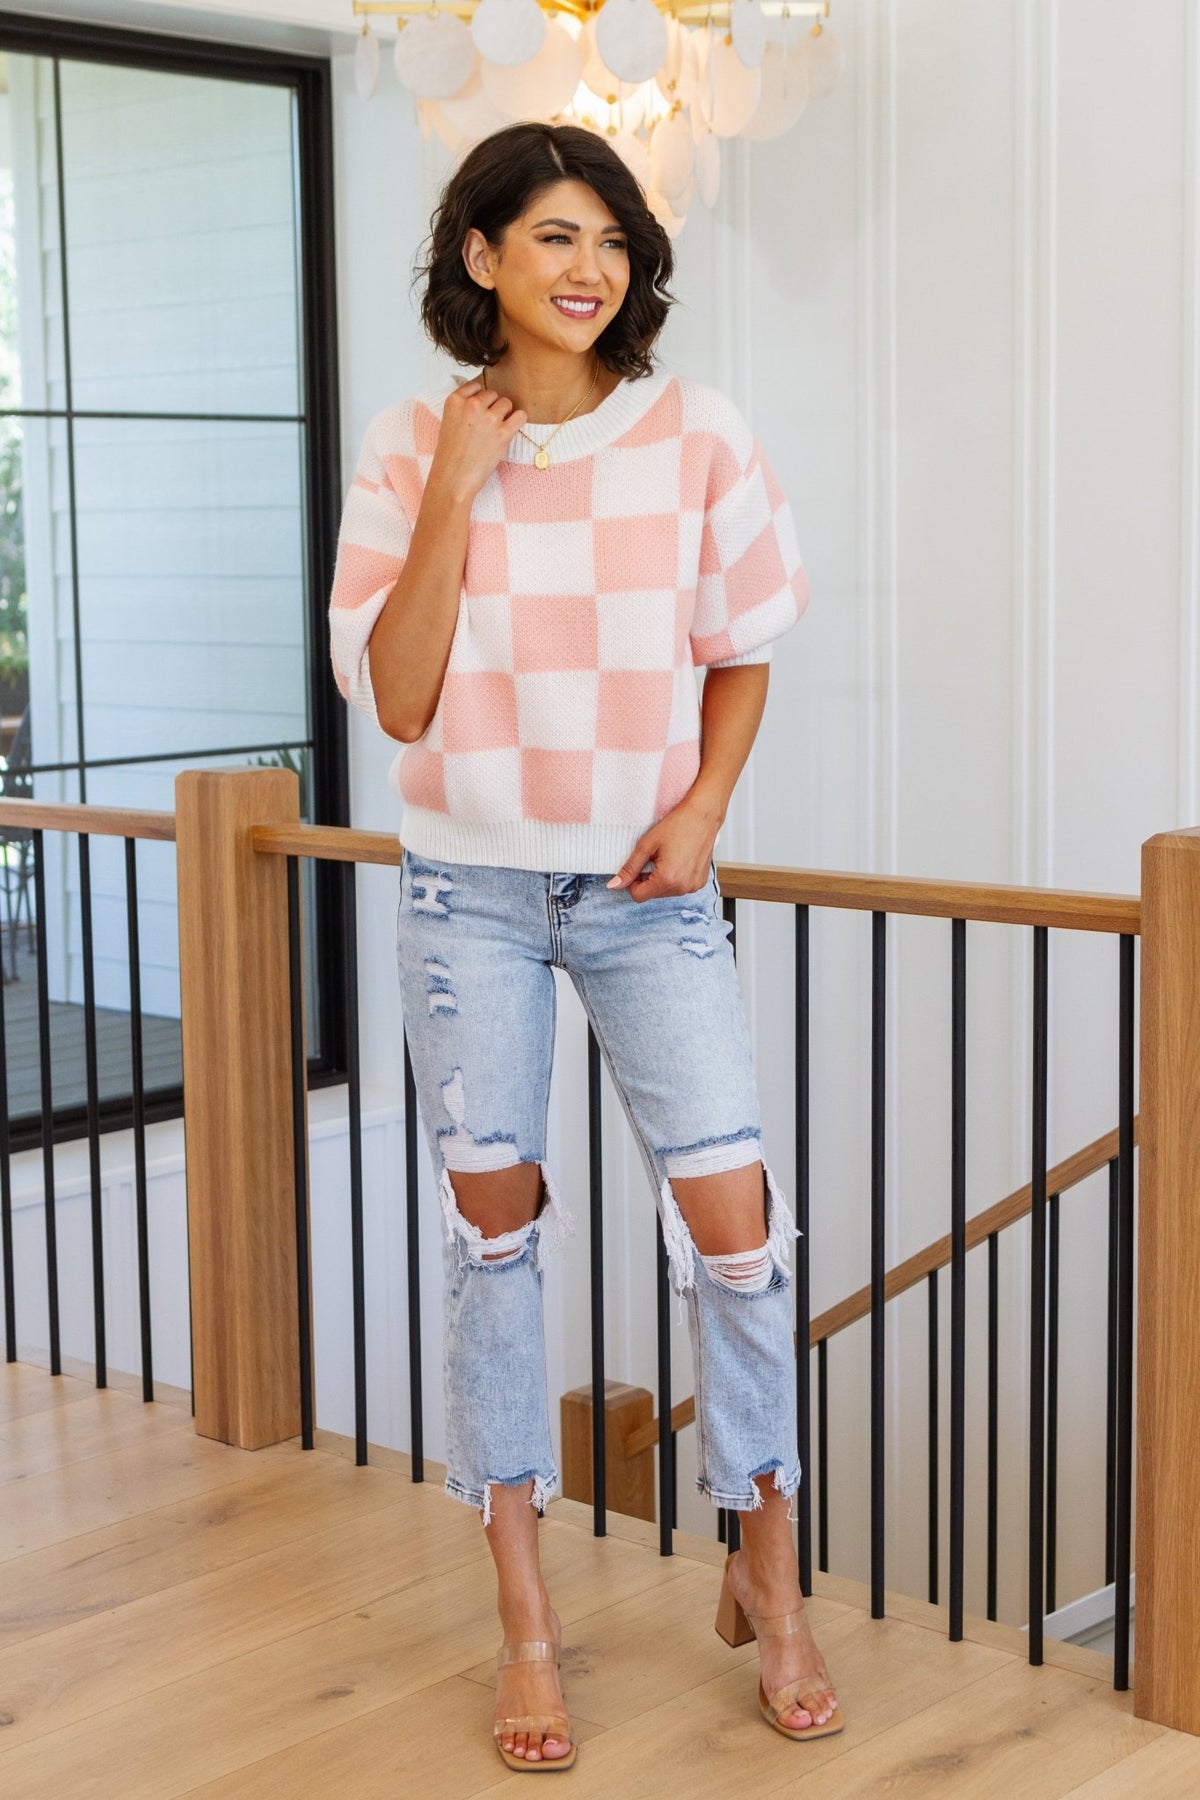 Start Me Up Checkered Sweater - Happily Ever Atchison Shop Co.